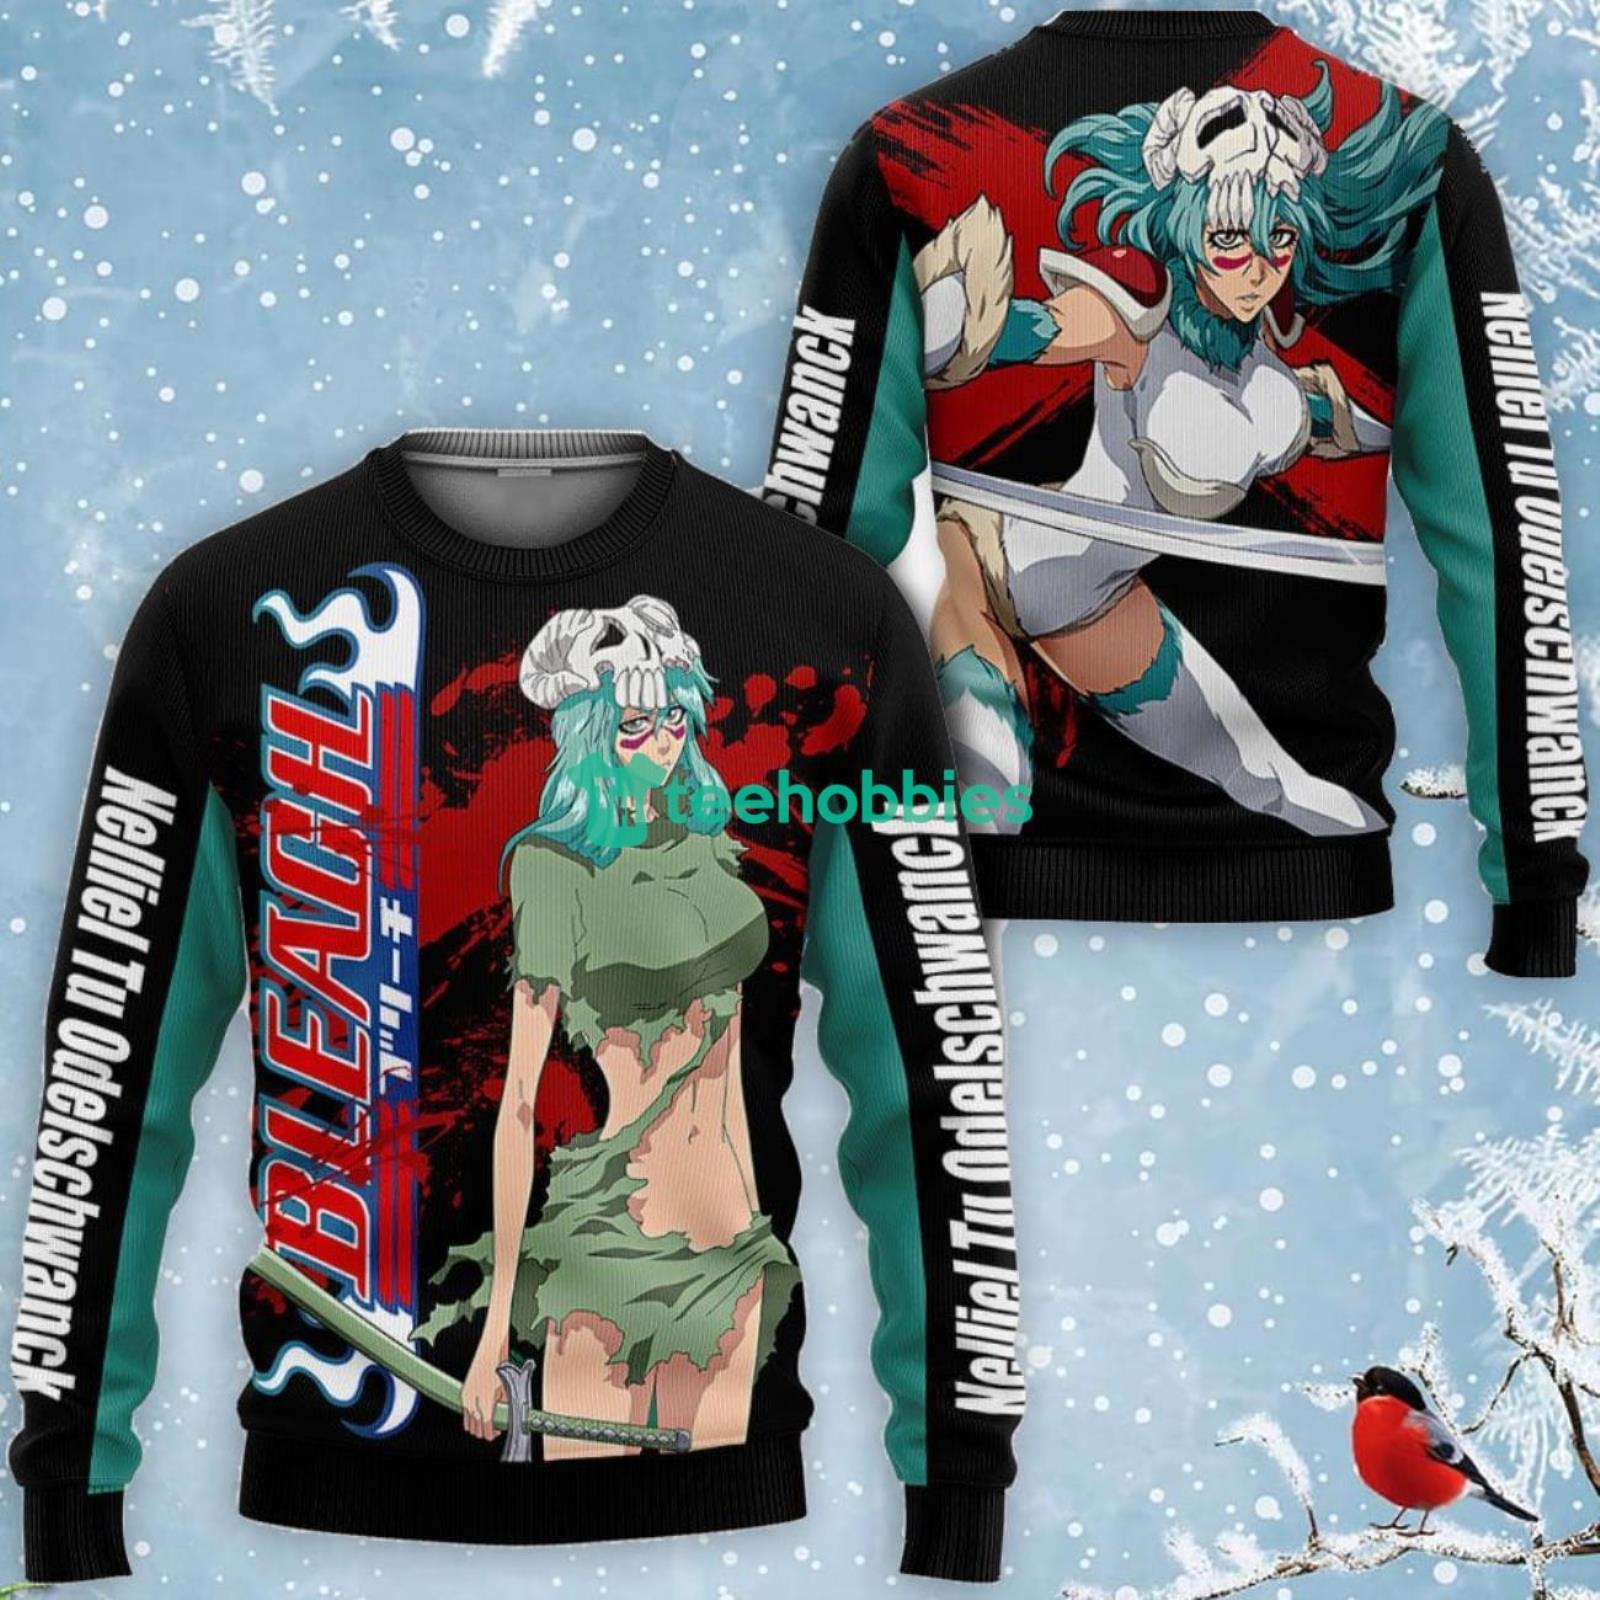 Nel Tu Lover All Over Printed 3D Shirt Bleach Anime Fans Product Photo 2 Product photo 2